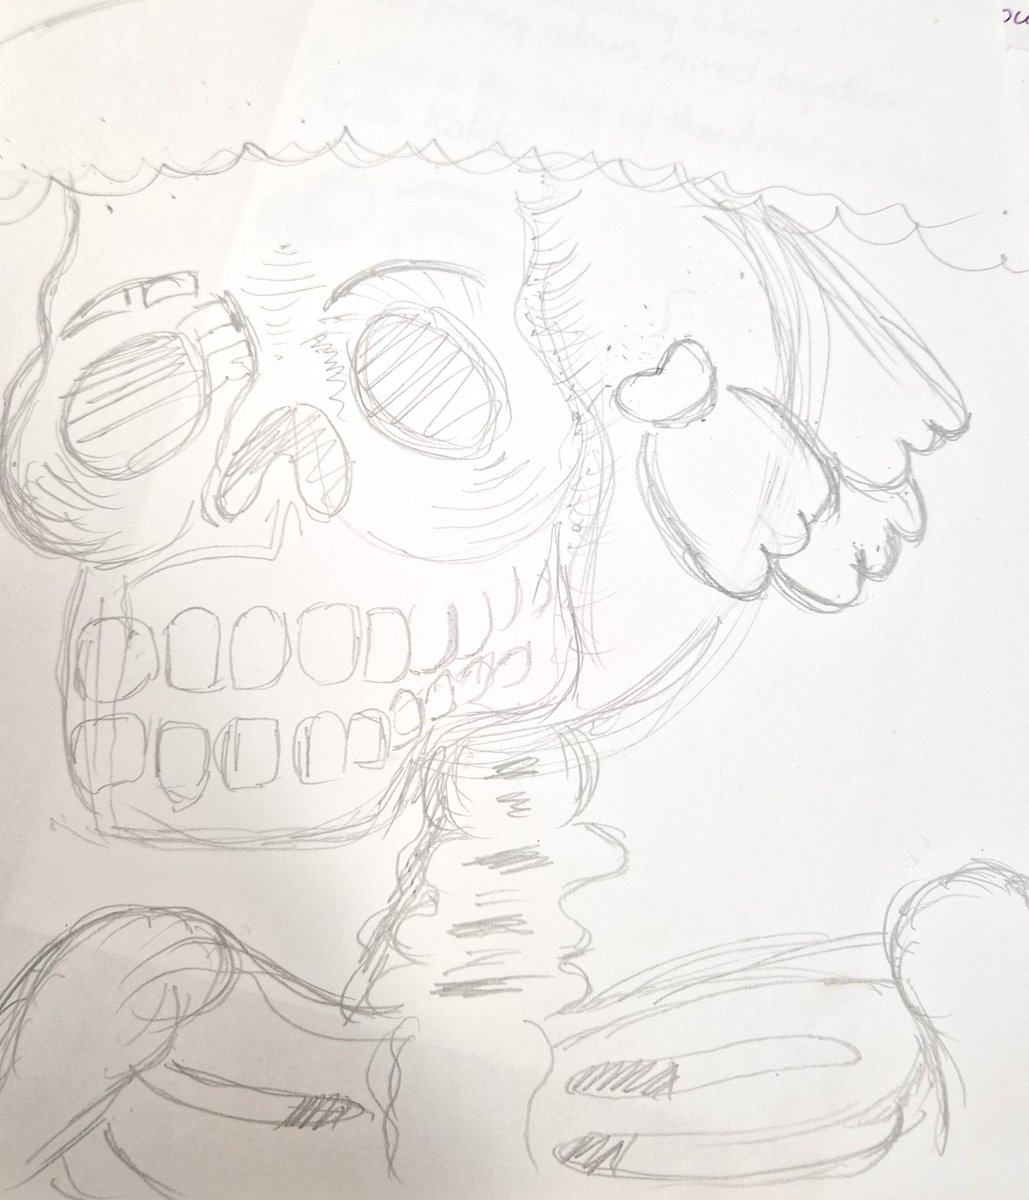 Year 9 have been competing a replica of Jose Guadalupe Posada this week. They are carefully observing and drawing in pencil, then refining with pen.